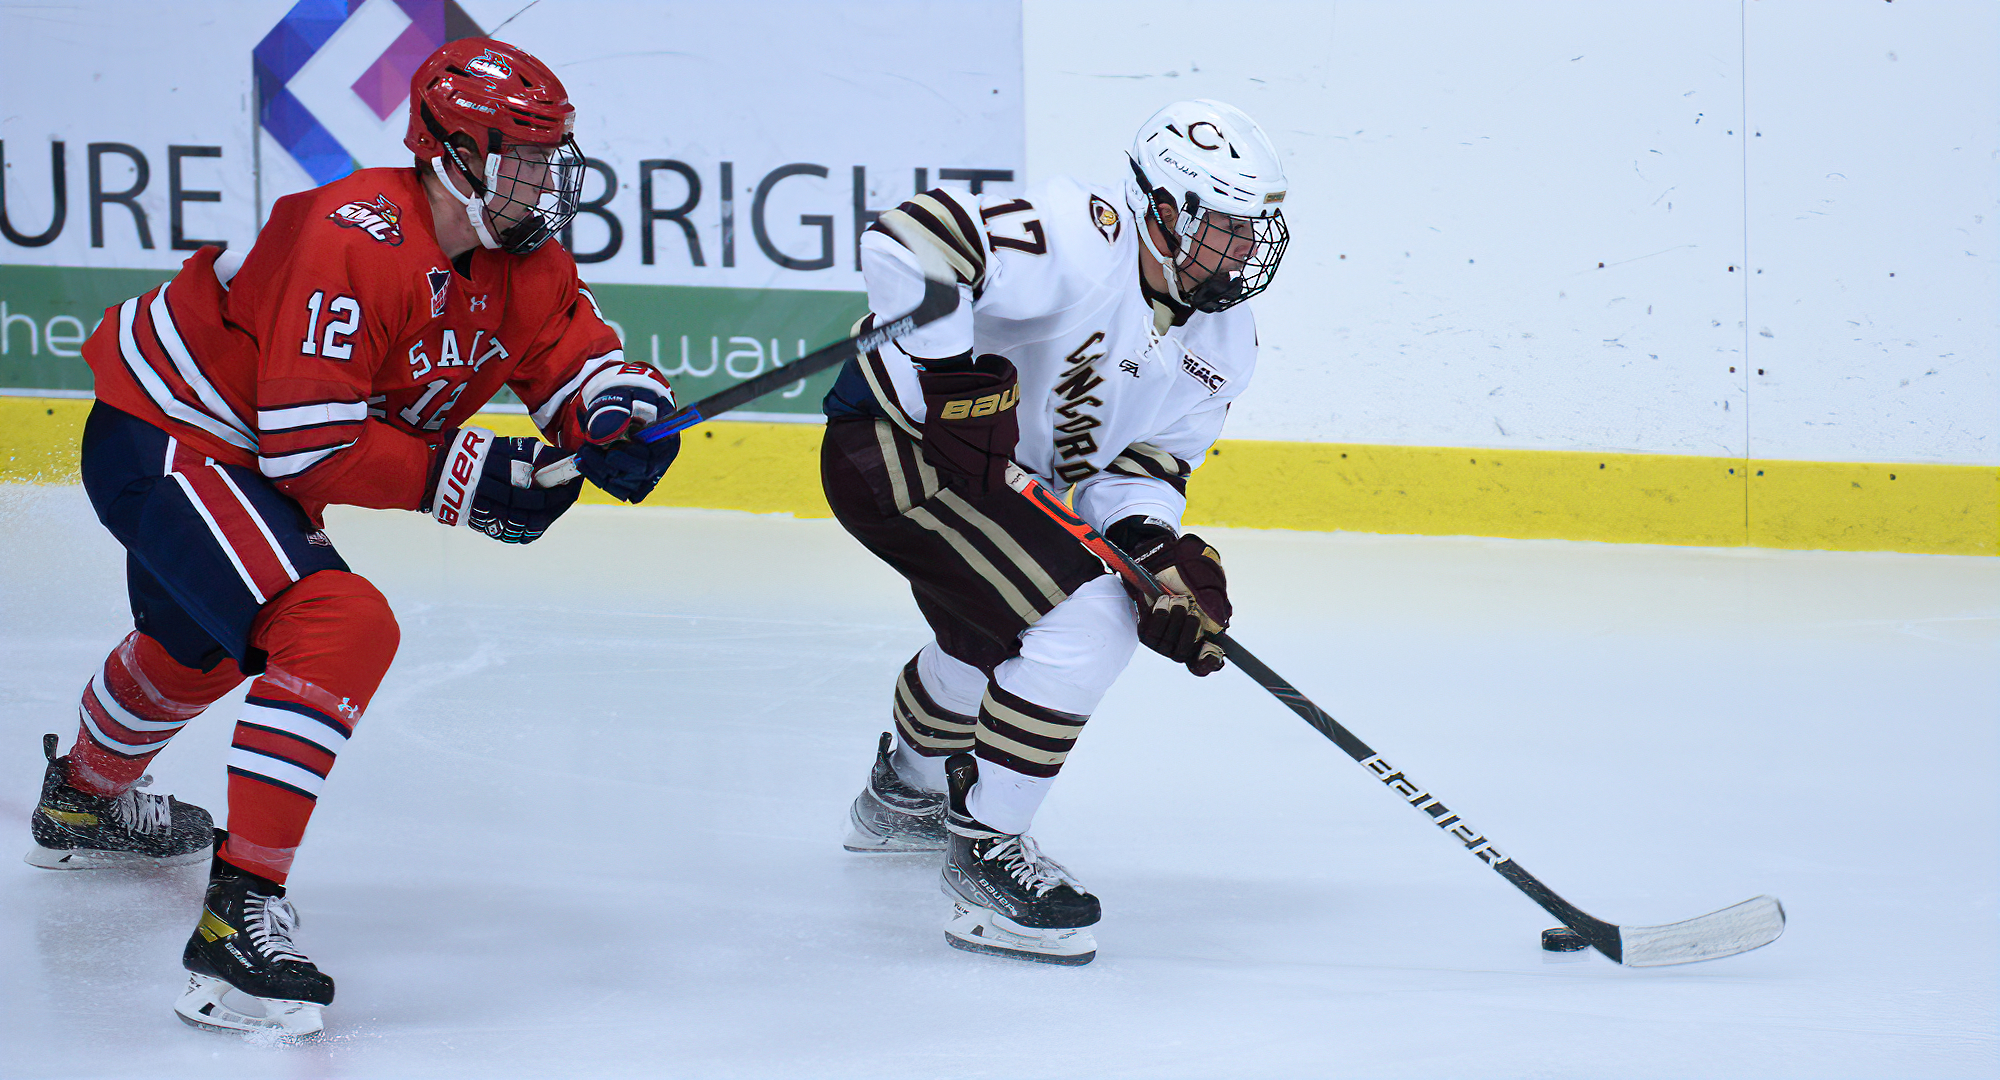 Sophomore Mason Plante had two goals and an assist in the Cobbers' 7-1 win in the series opener at St. Mary's.